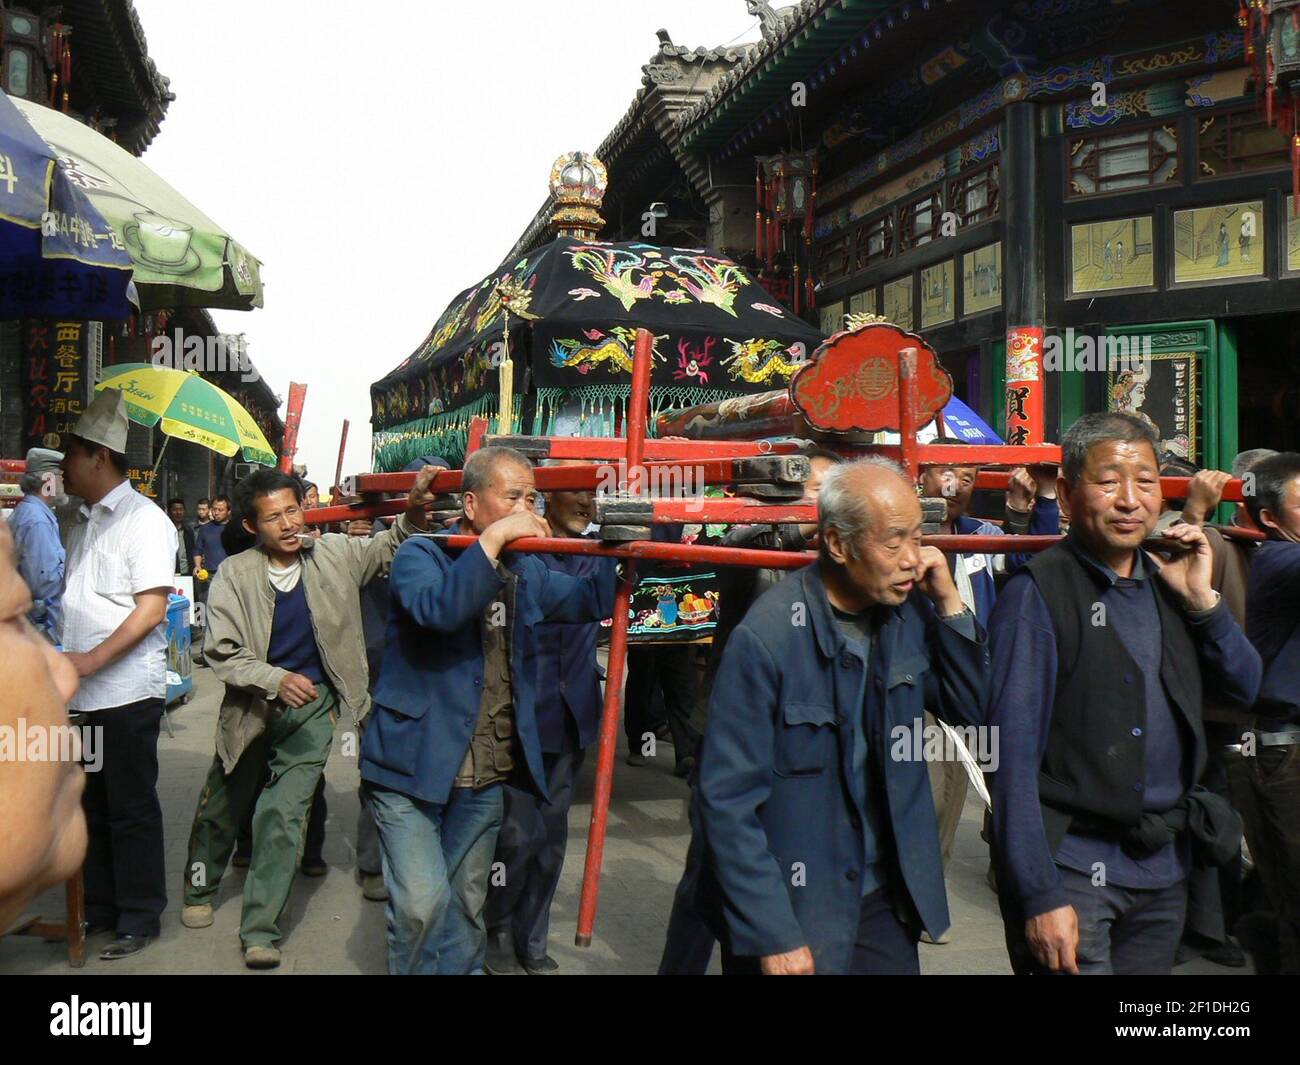 Local men lead a funeral procession through Pingyao, China. The town has many museums, but the best sites are snapshots of every day life. (Photo by Carol Pucci/Seattle Times/MCT/Sipa USA) Stock Photo